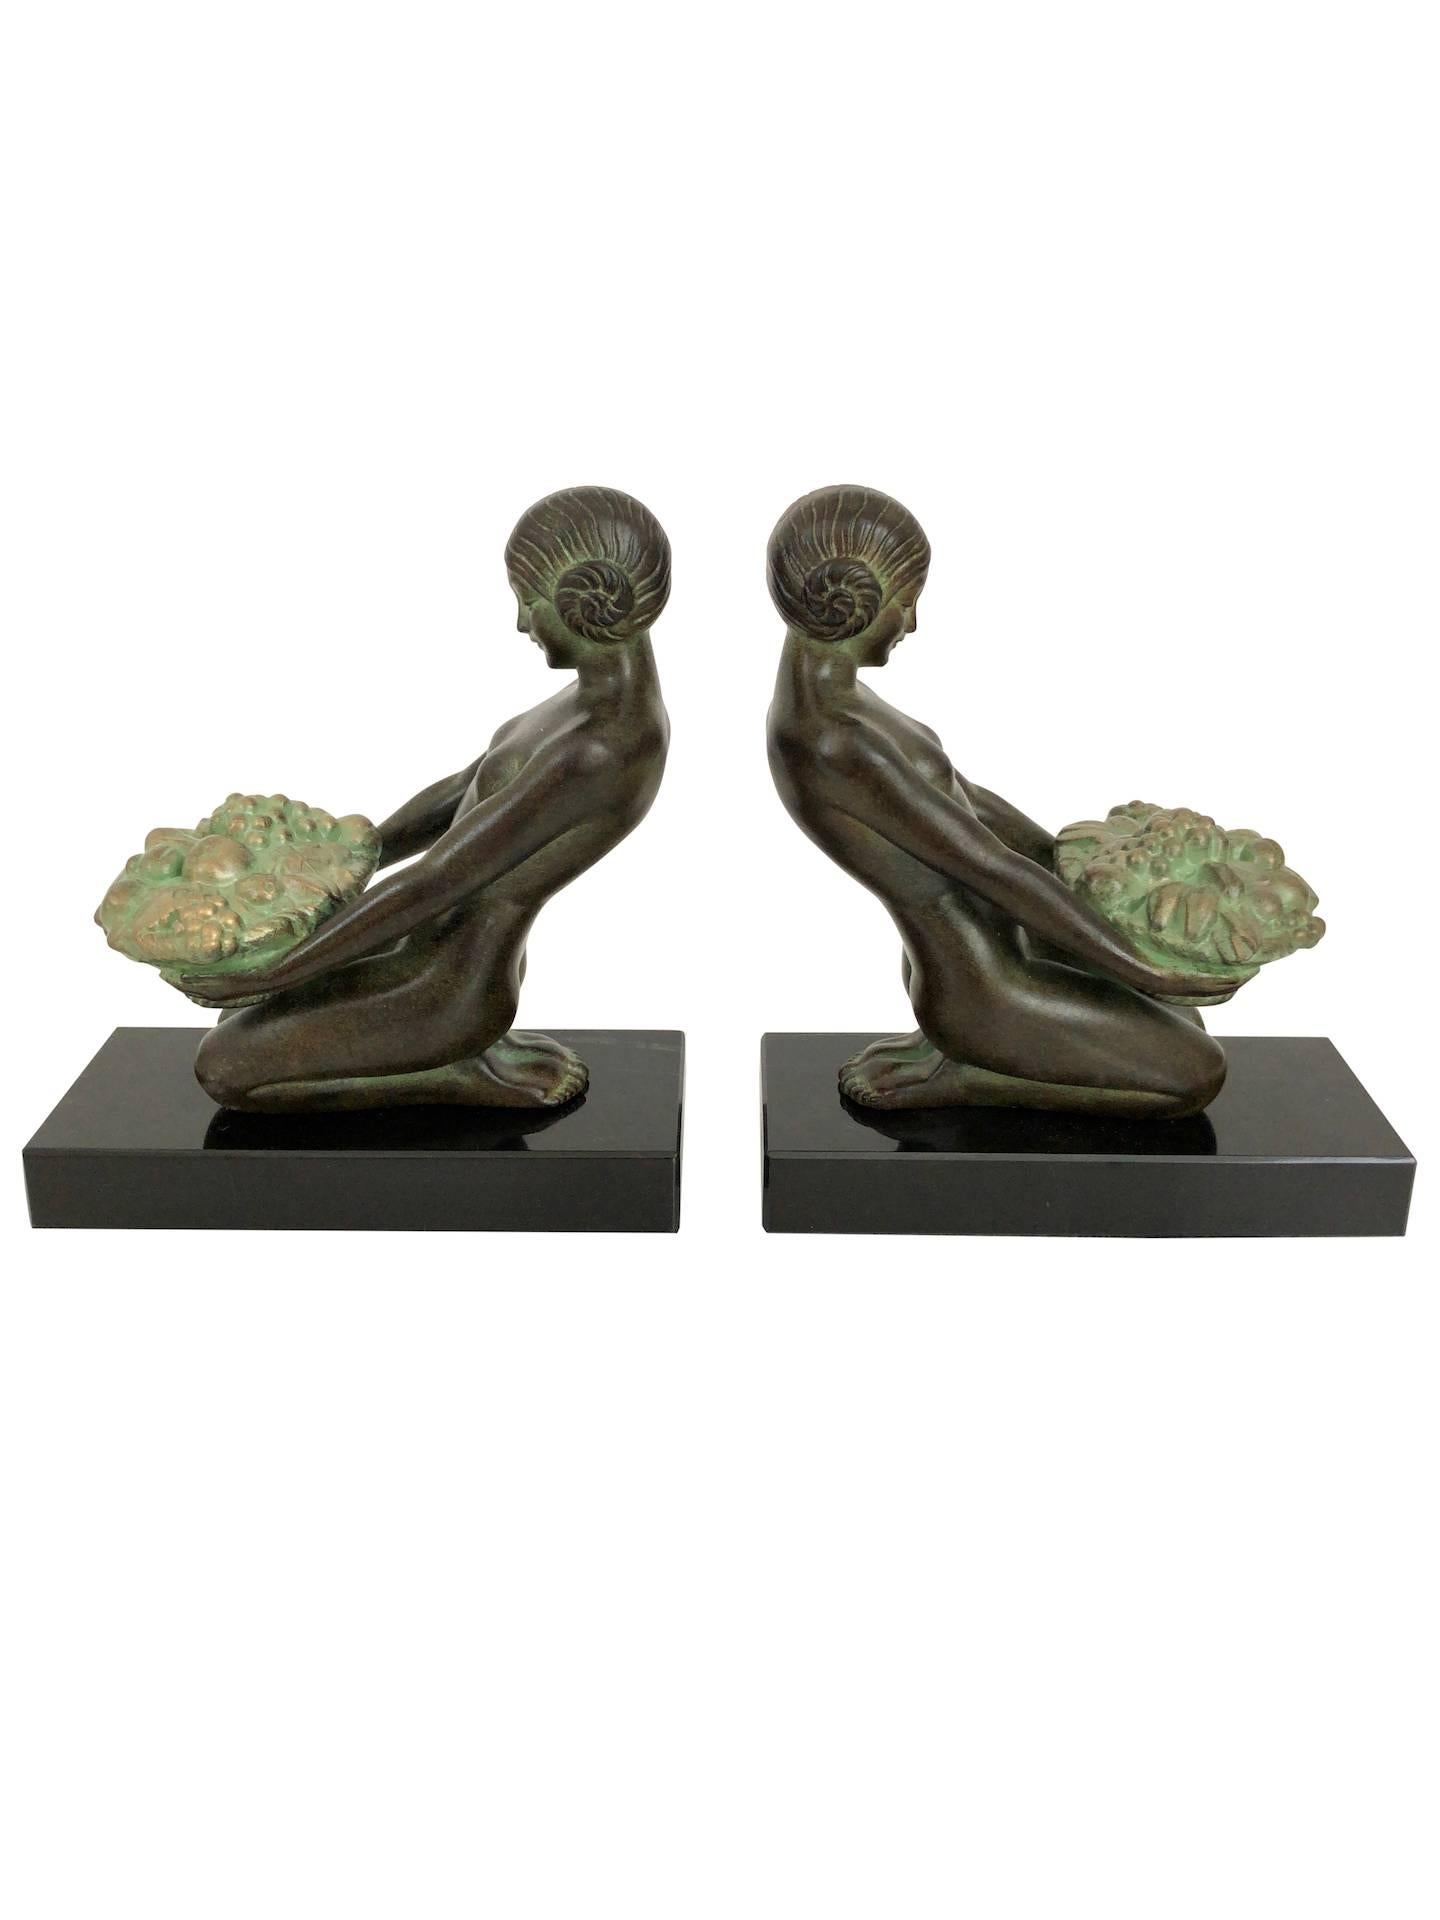 “Cueillette”
Original “Max Le Verrier”
Art Deco style, France.

Ladies with flower baskets 
Bookends made in “Régule” (spelter)
signed

Socle in black stone (could have a different marbleization than the picture) 
Green patina - Handwork,